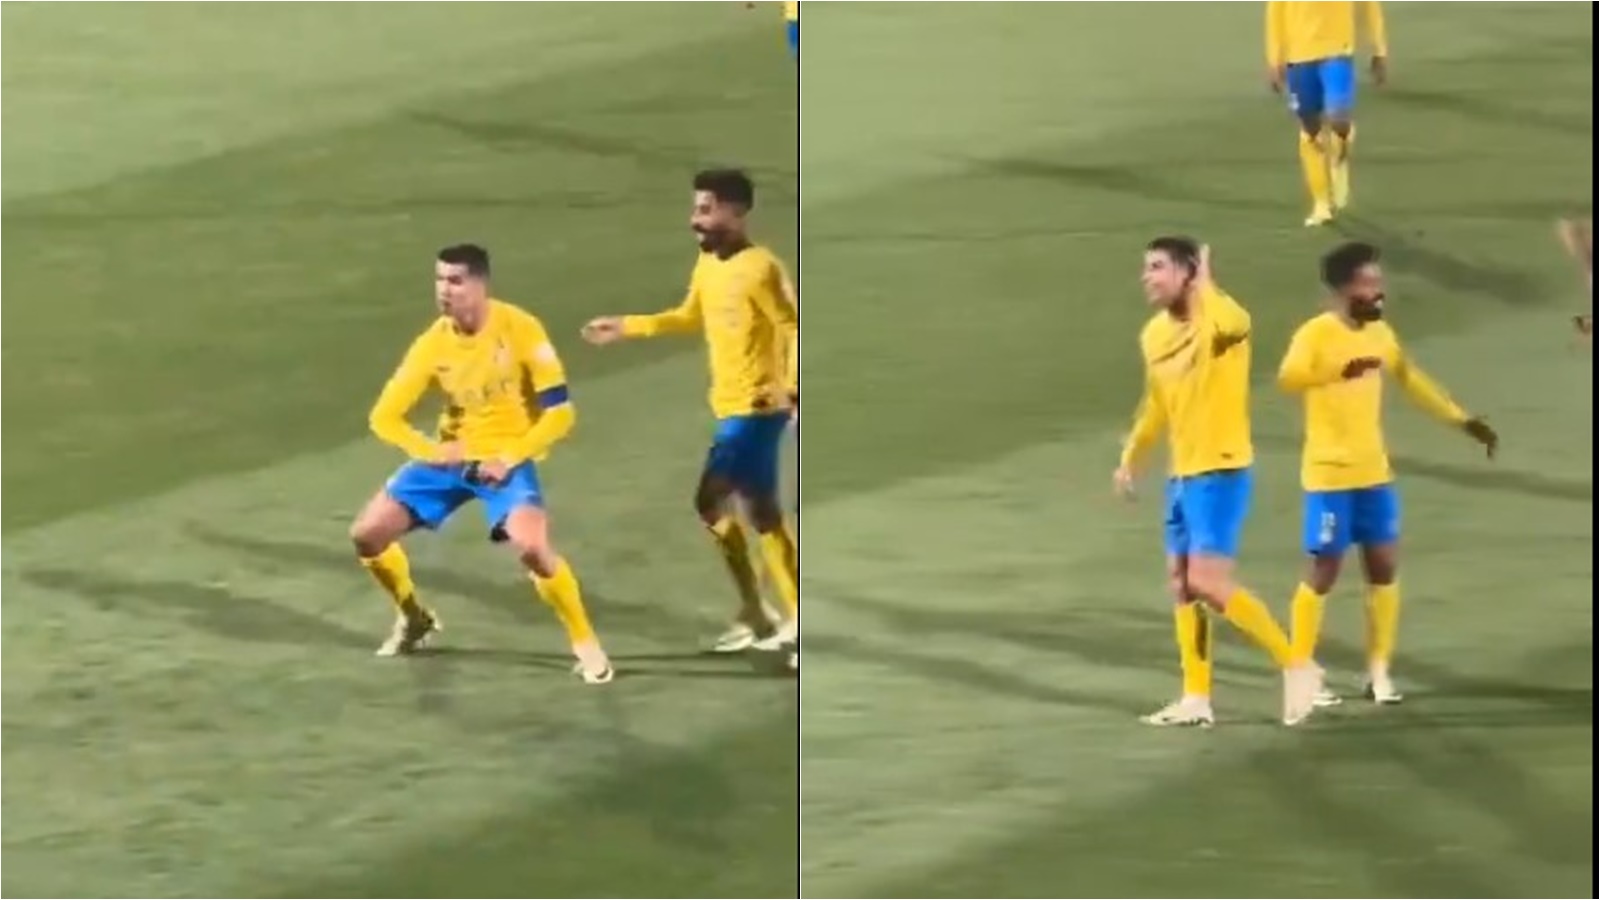 android, cristiano ronaldo banned for a match after obscene gesture towards fans chanting lionel messi’s name